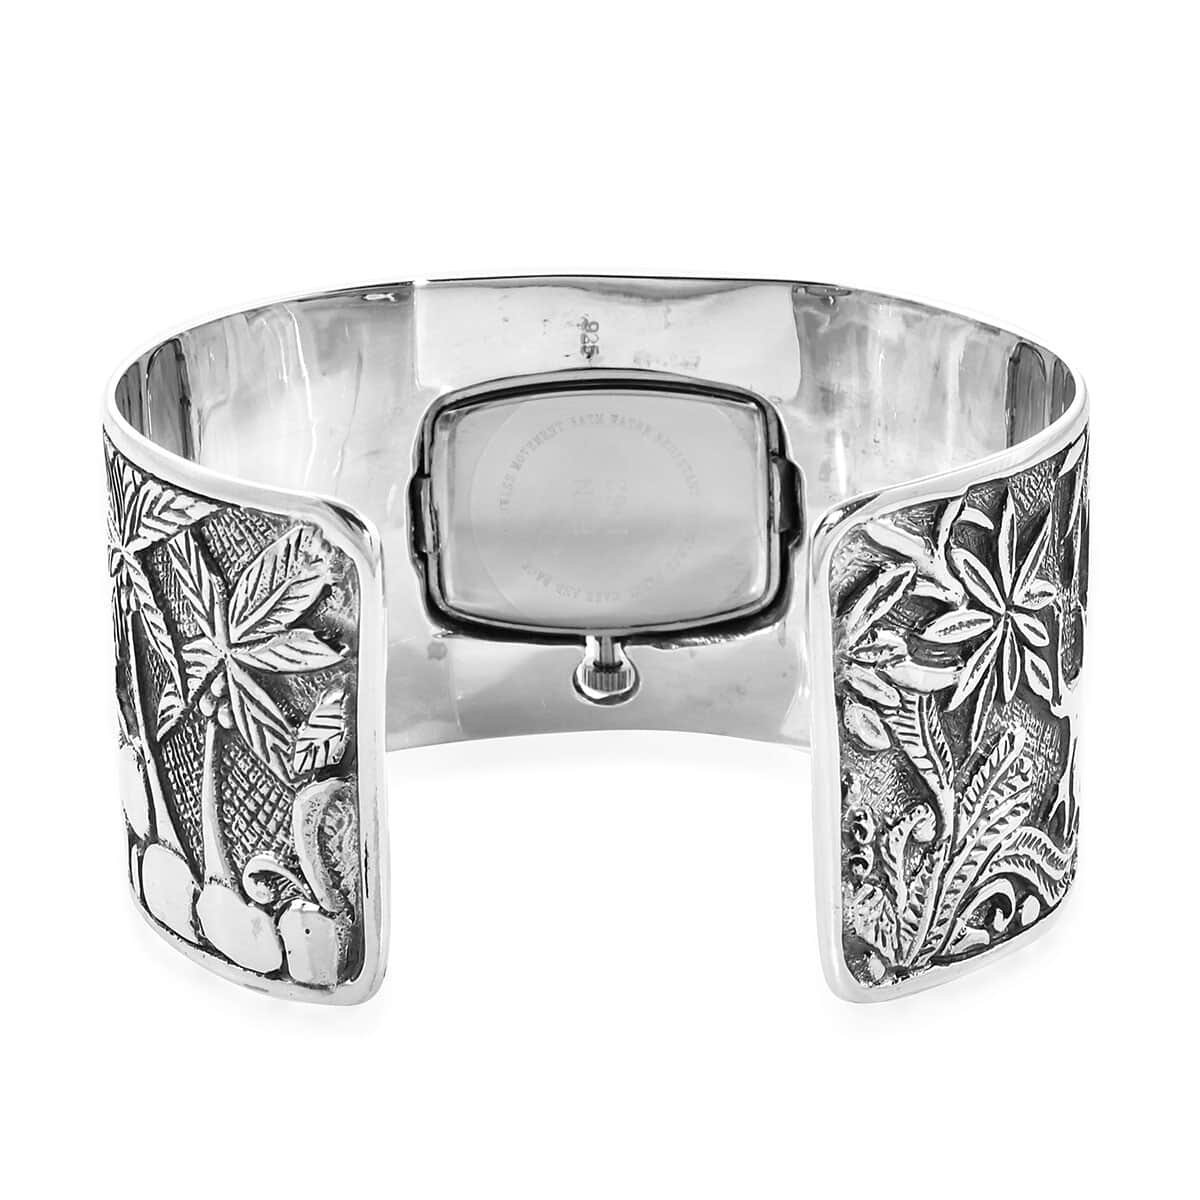 BALI LEGACY EON 1962 Swiss Movement Cuff Bracelet Watch in Sterling Silver with Stainless Steel Back , Designer Bracelet Watch , Analog Luxury Wristwatch image number 5